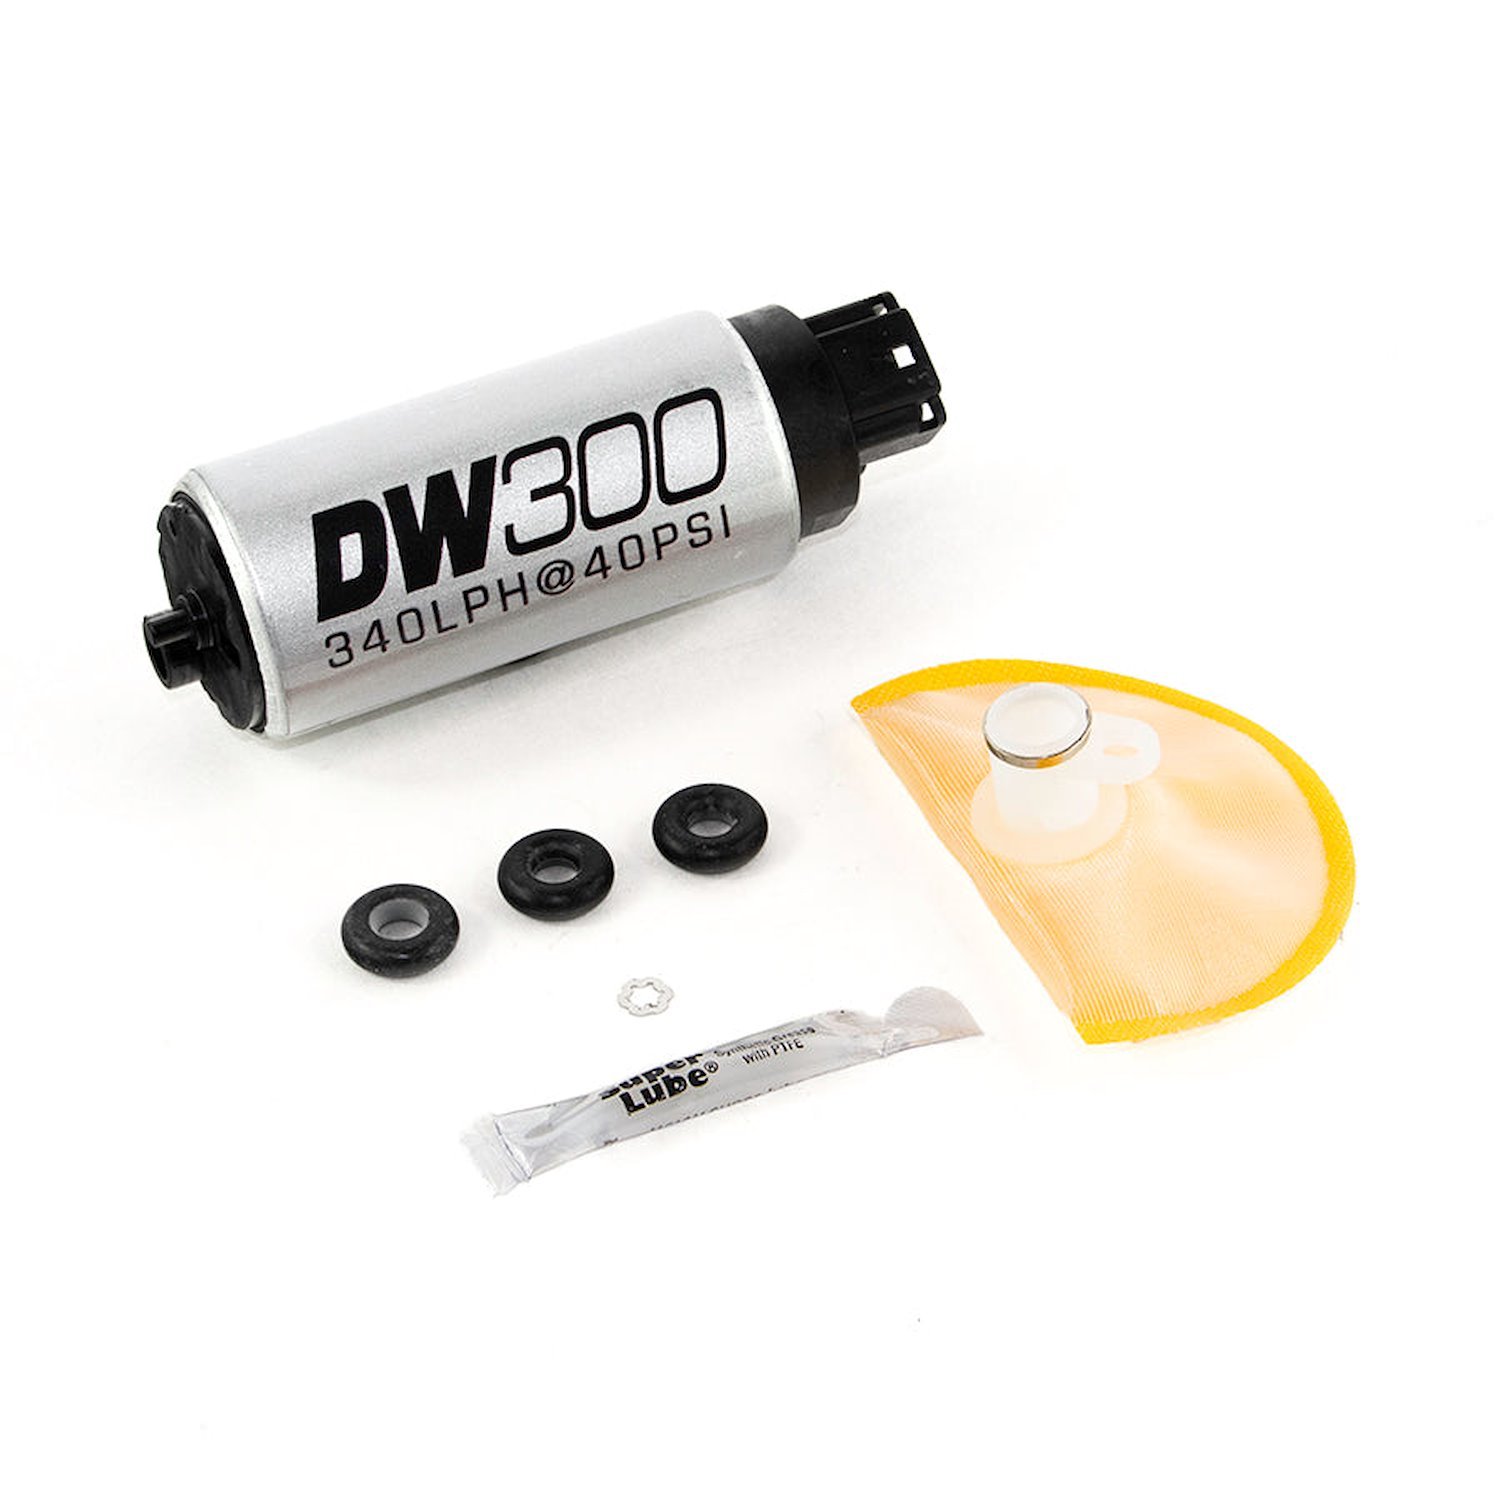 9301s1005 DW300 series 340lph in-tank fuel pump w/ install kit for G35 03-08 350z 03-08 and Legacy GT 10+